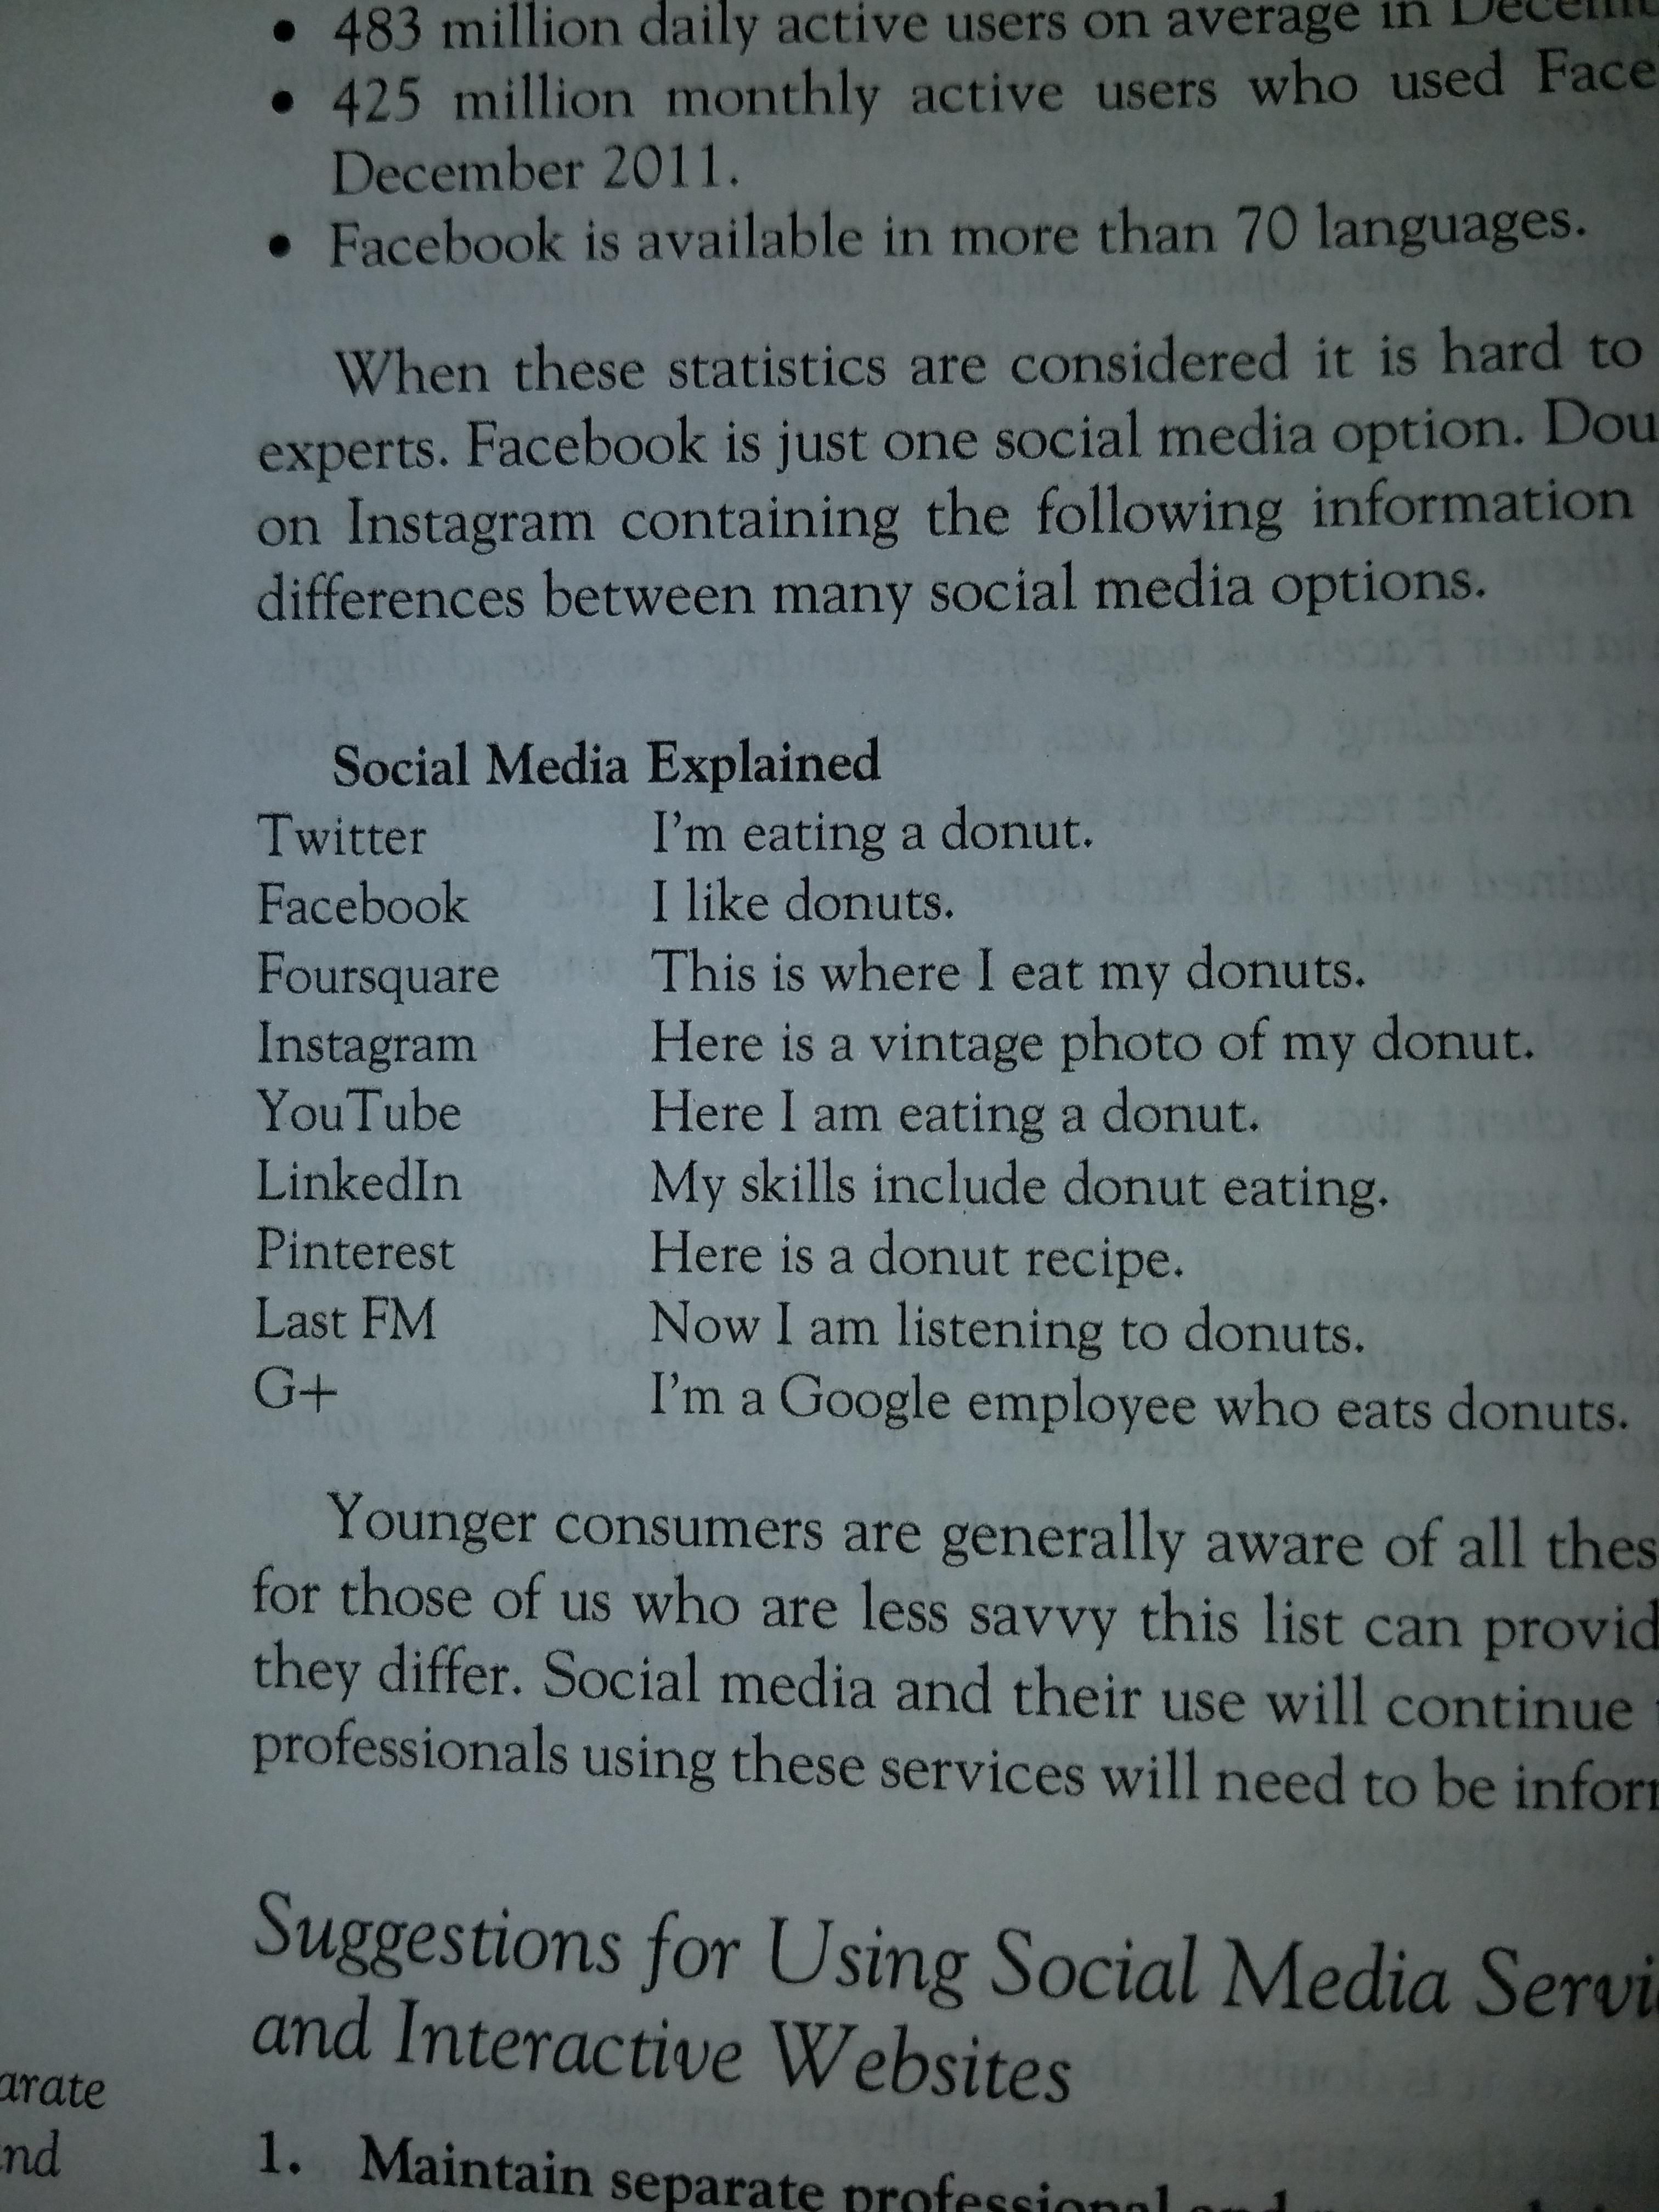 This textbook uses donuts to explain social media.